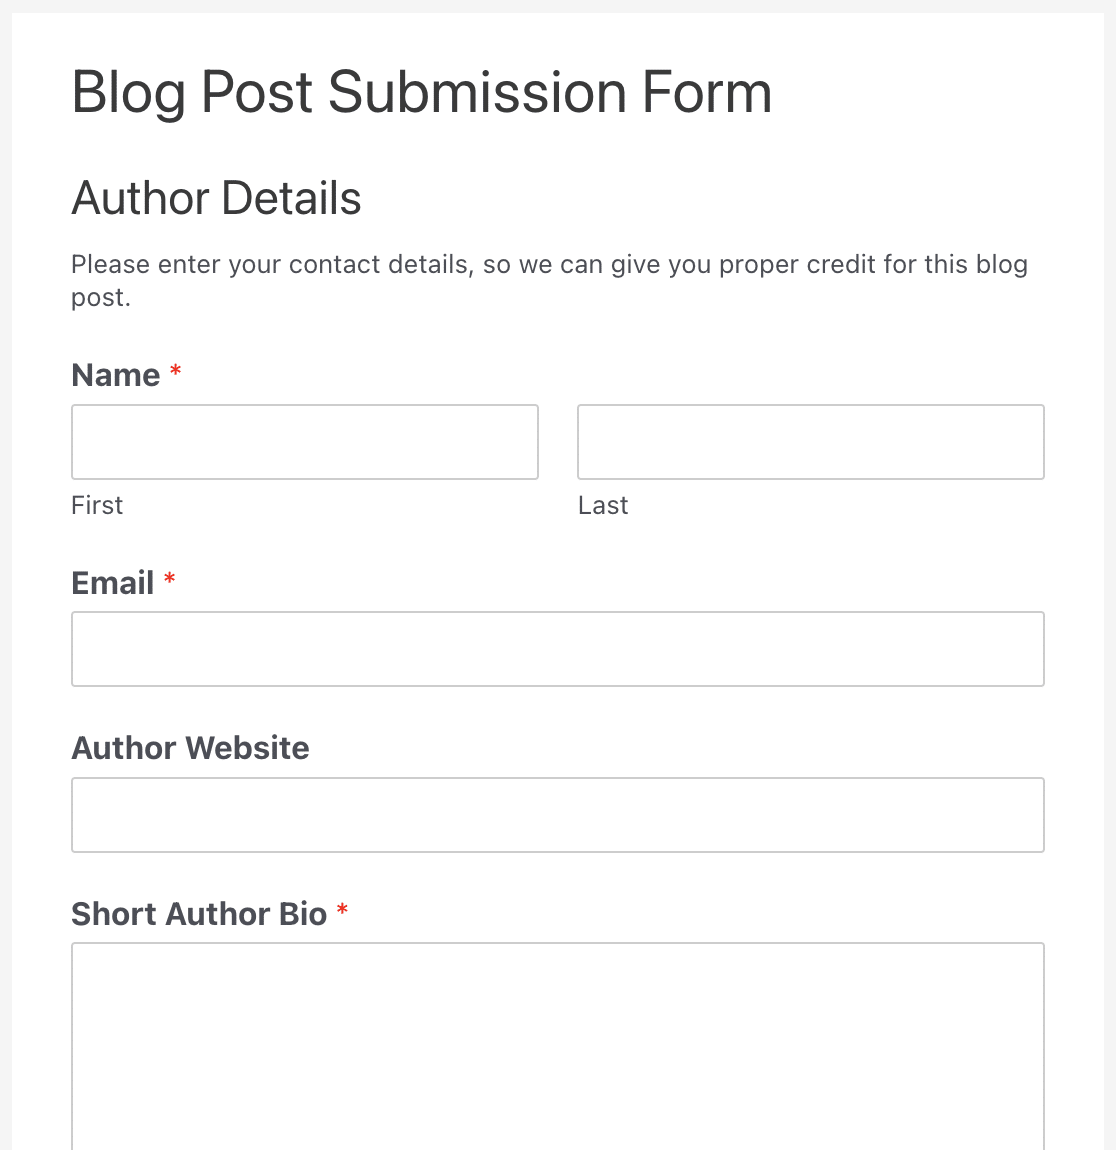 A blog post submission form